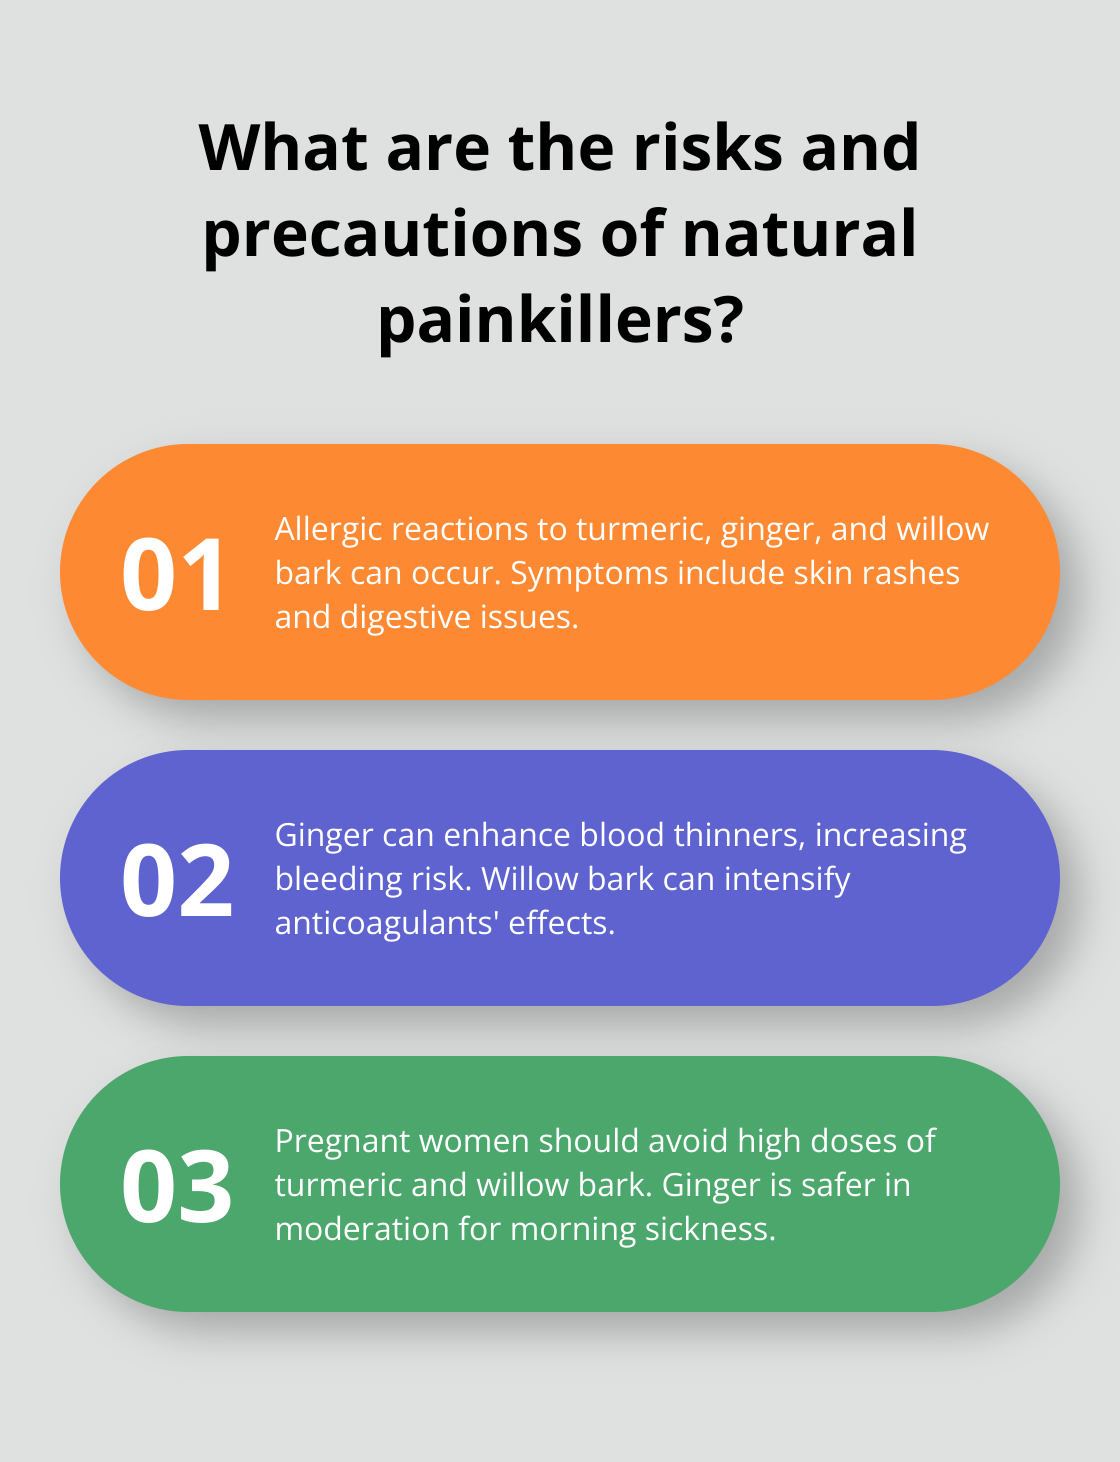 Fact - What are the risks and precautions of natural painkillers?